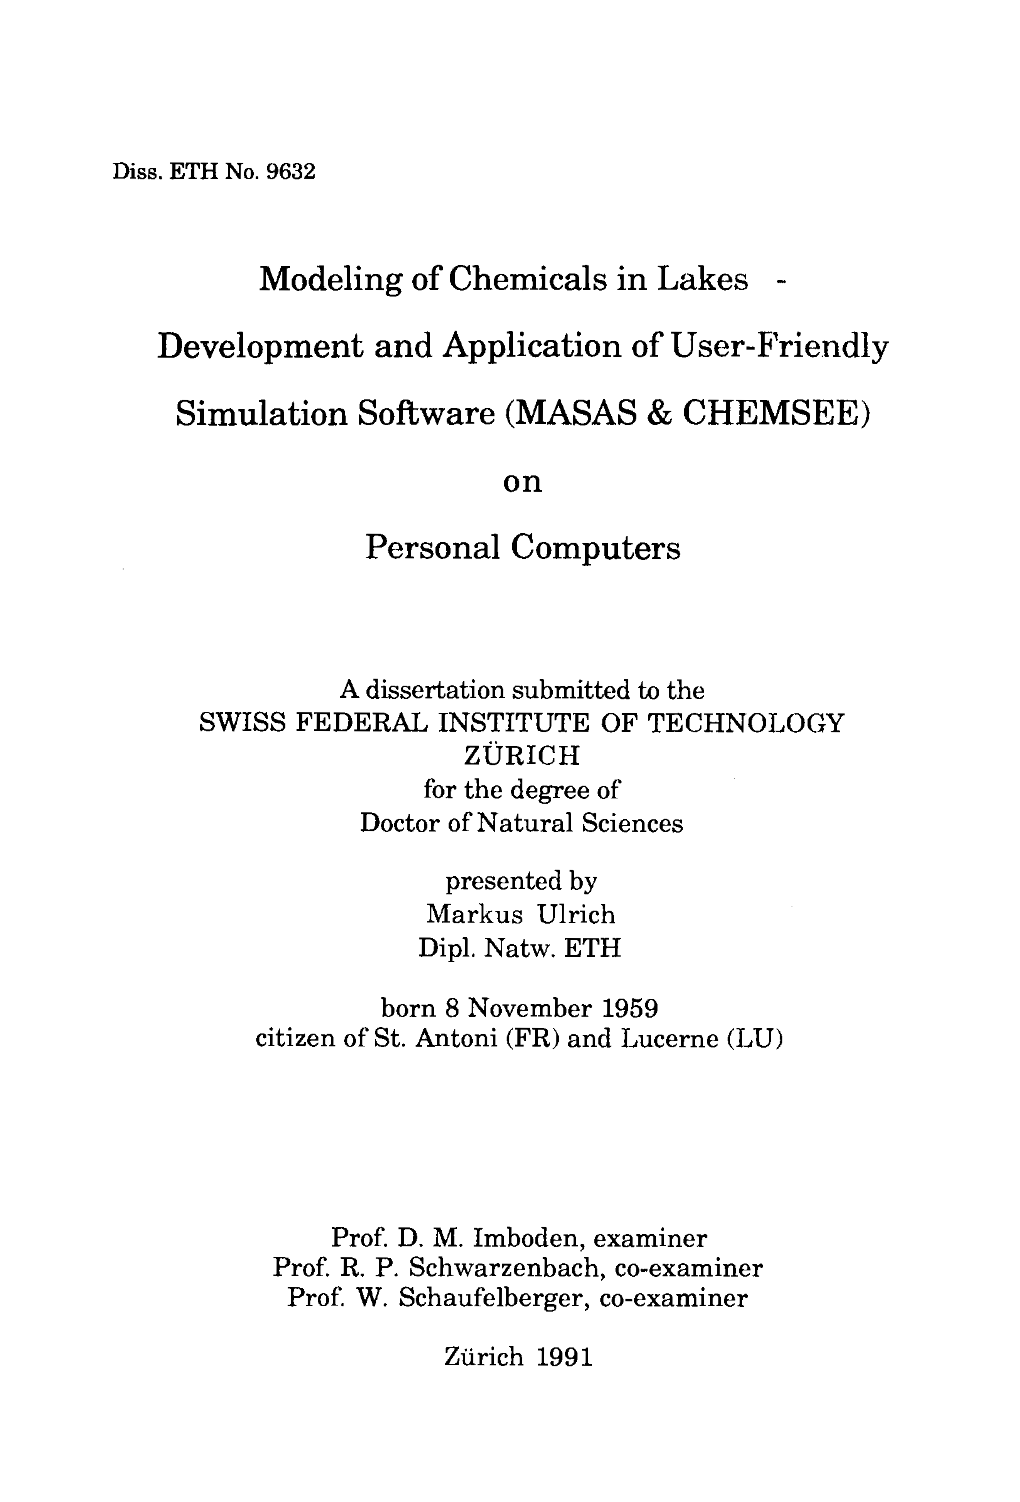 Modeling of Chemicals in Lakes - Development and Application of User-Friendly Simulation Software (MASAS & CHEMSEE) on Personal Computers